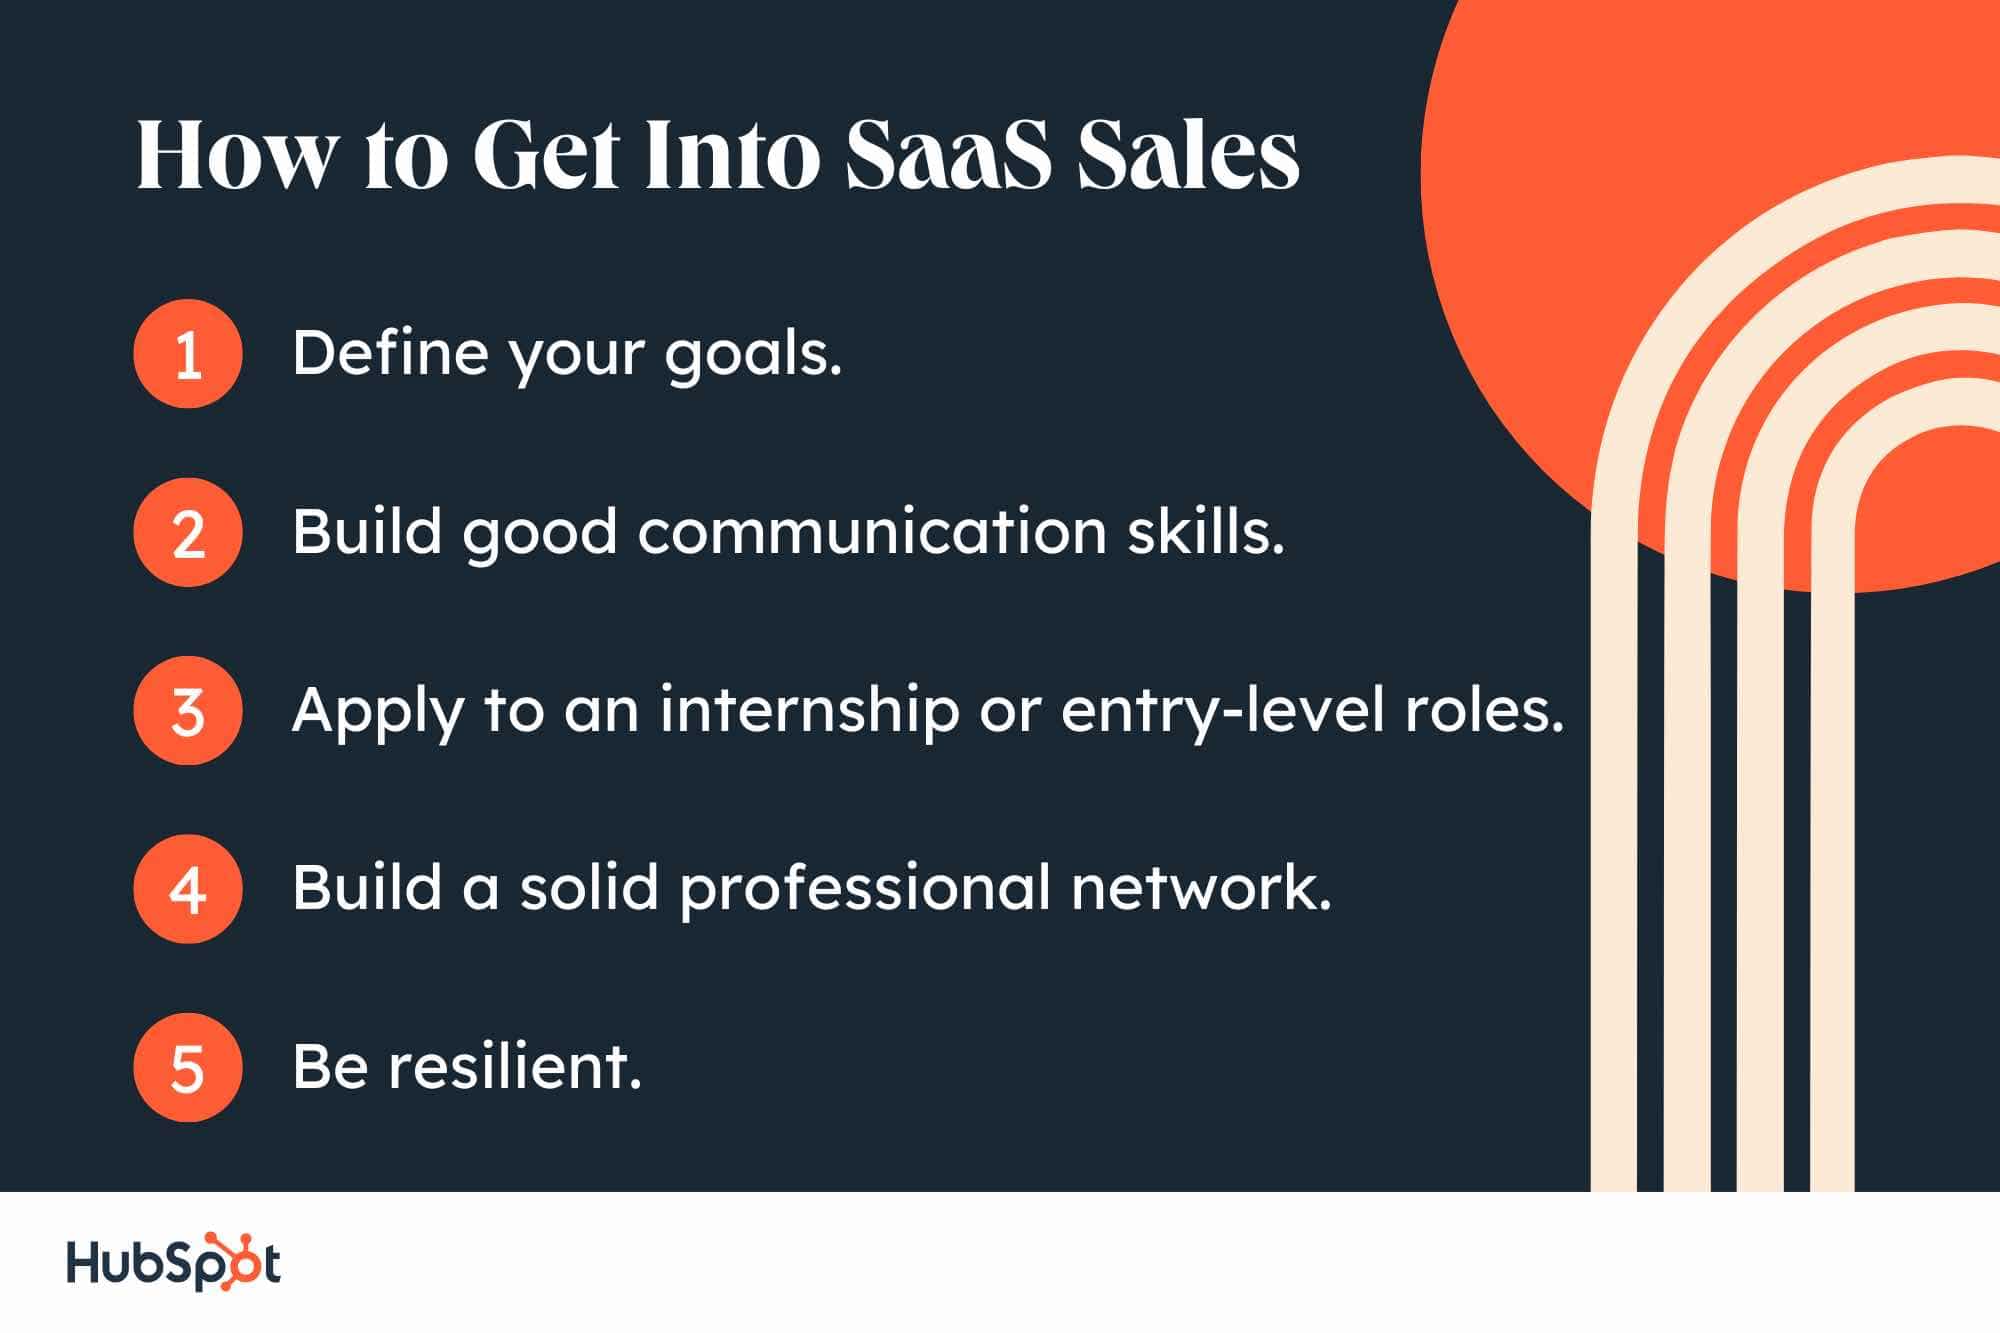 How to Get Into SaaS Sales. Define your goals. Build good communication skills. Apply to an internship or entry-level roles. Build a solid professional network. Be resilient.